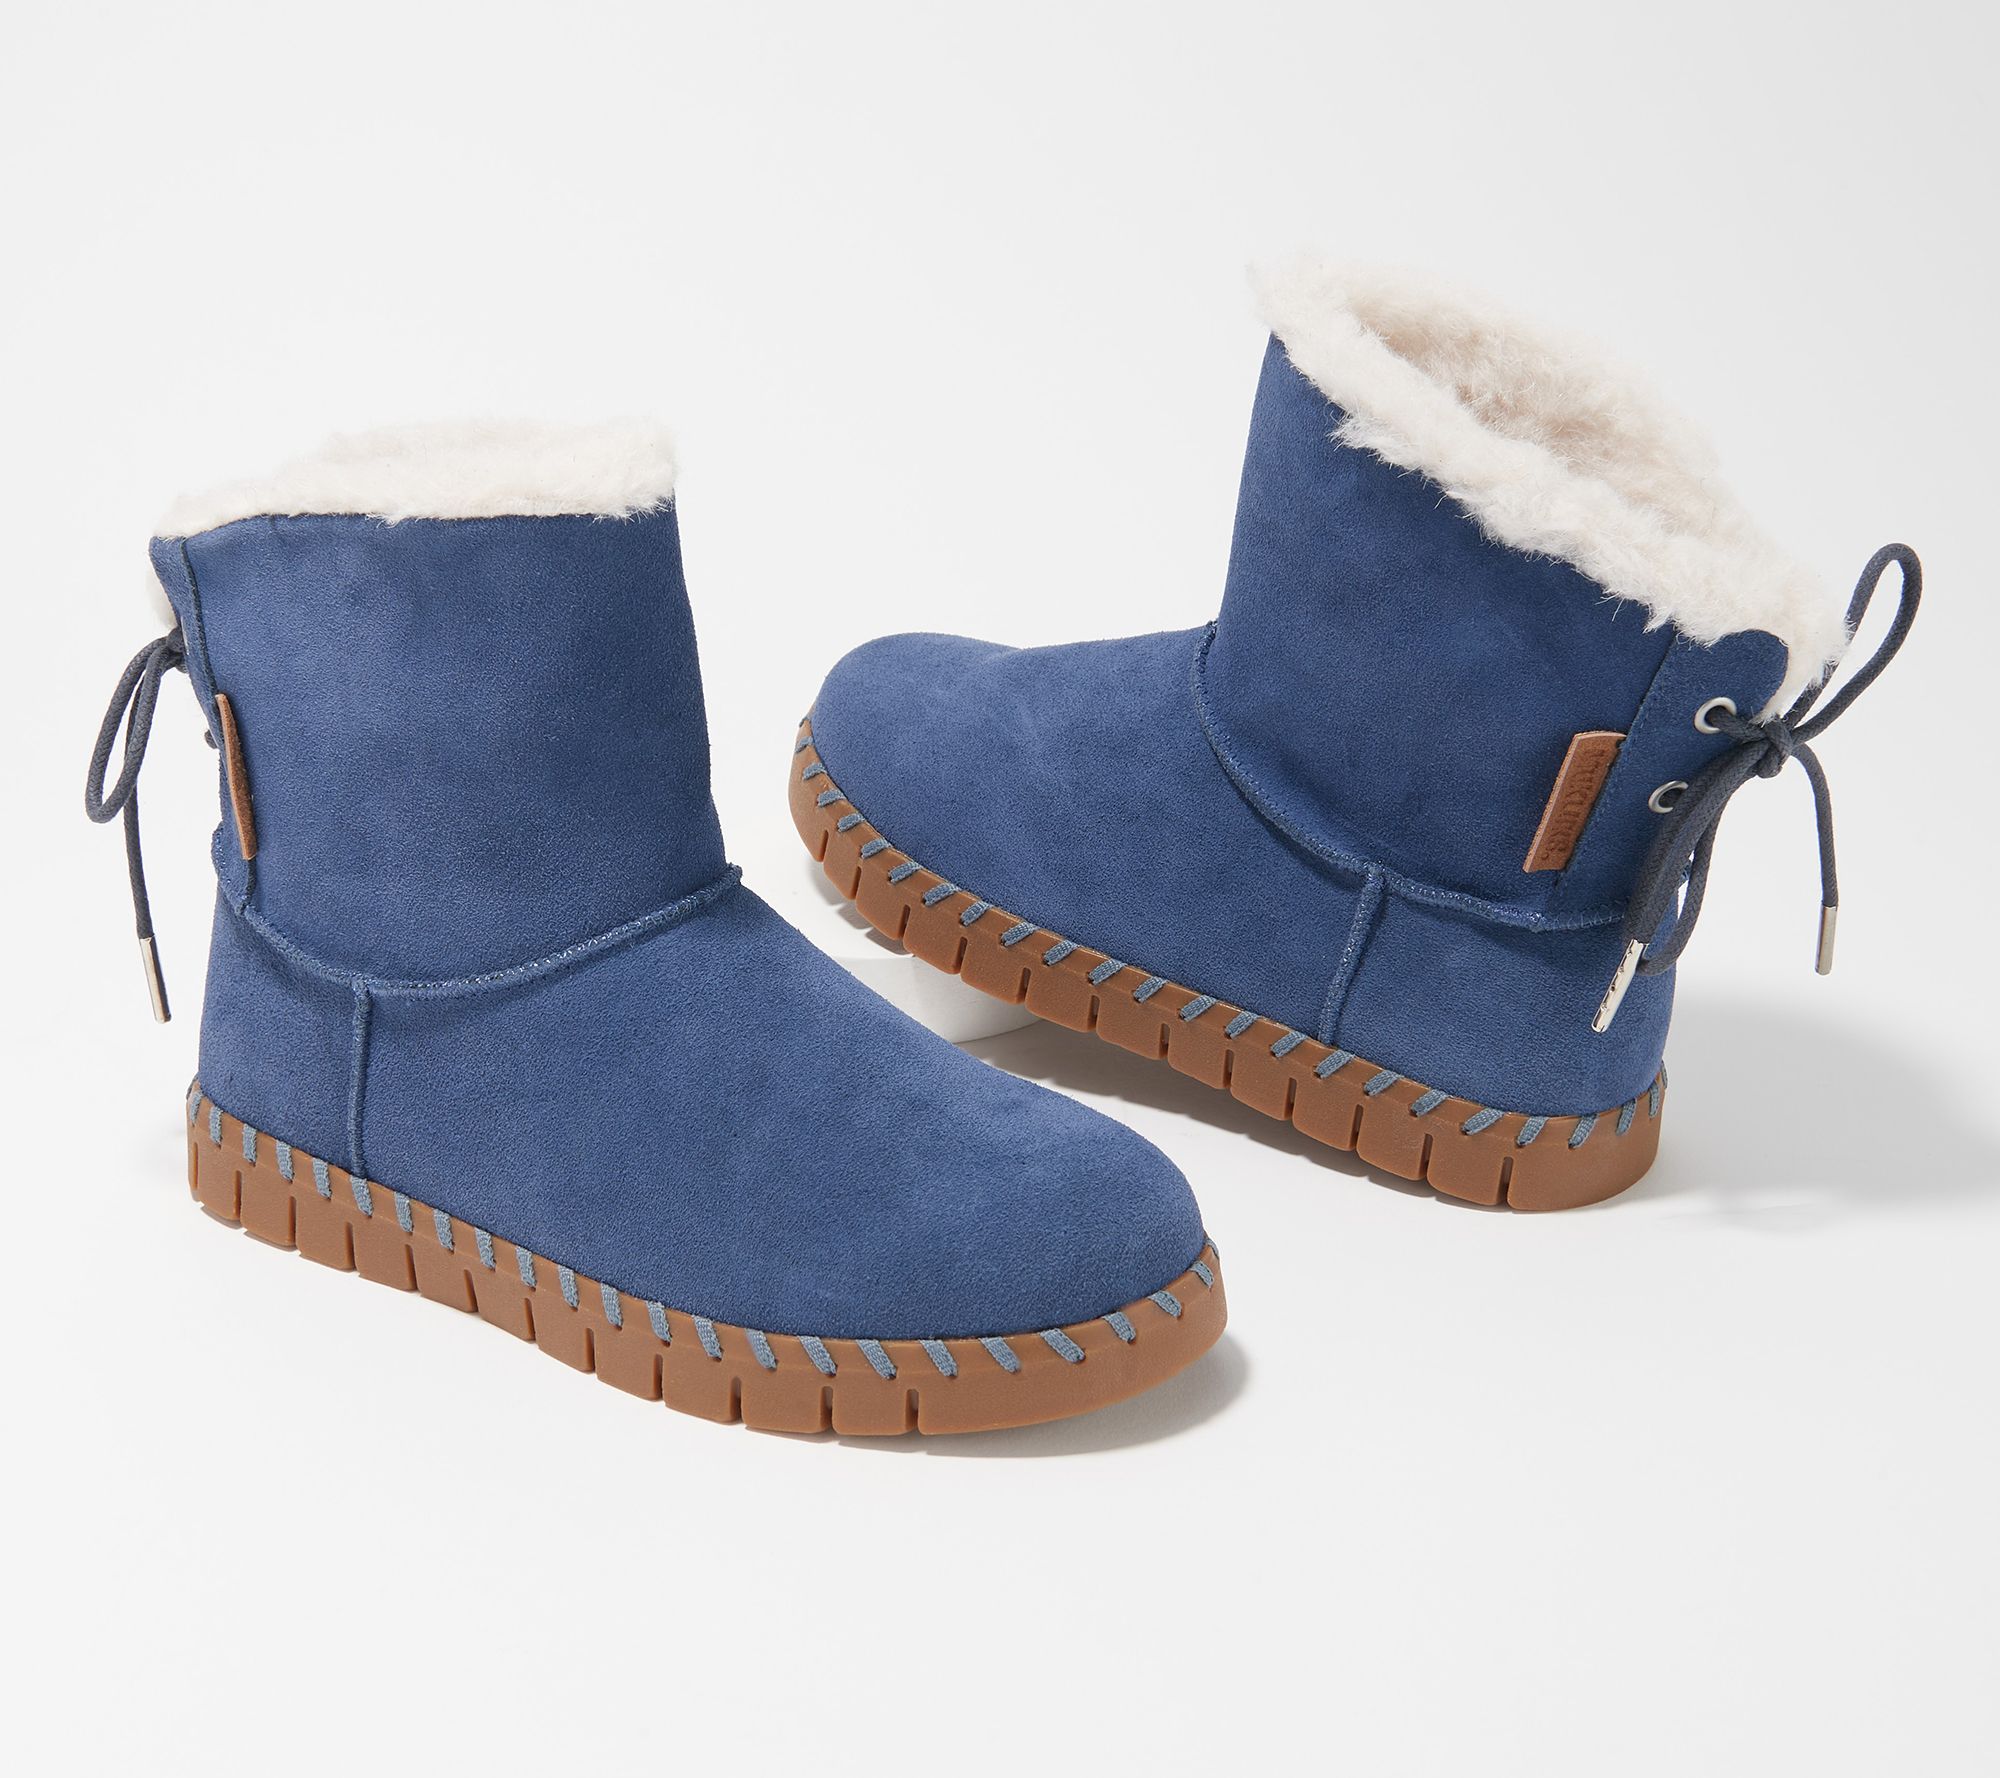 MUK LUKS Water Repellent Suede Boots - Albany - QVC.com